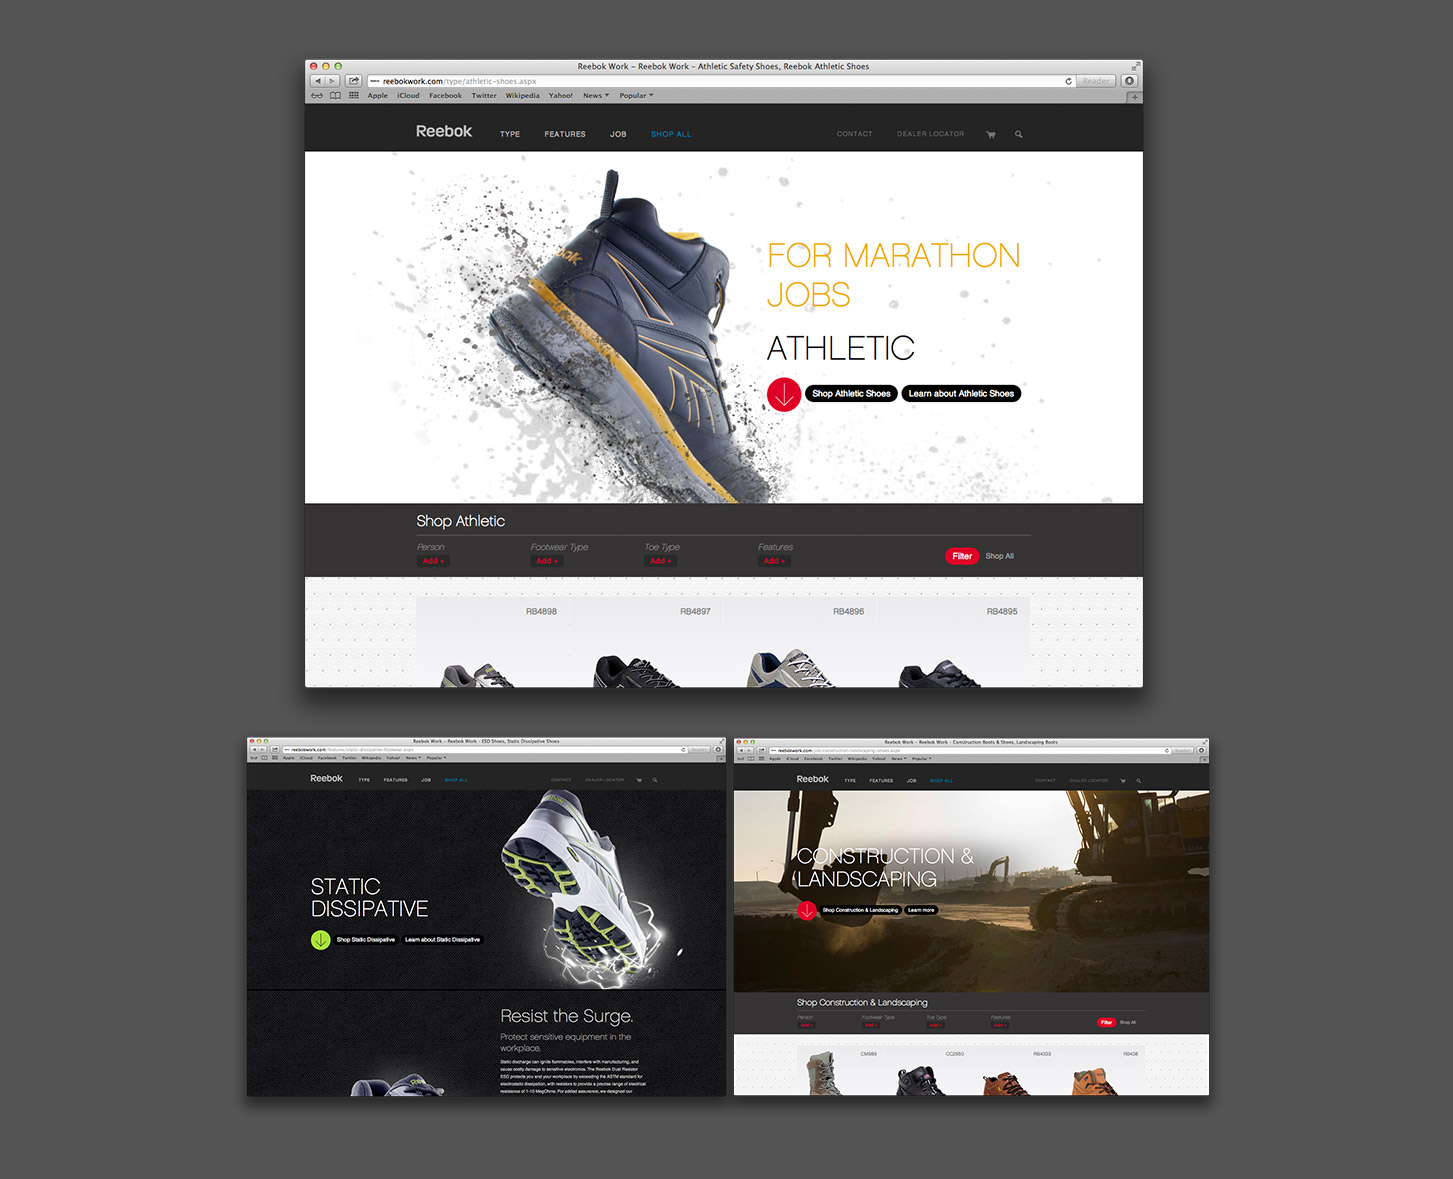 Product pages designs for the Reebok Work Website